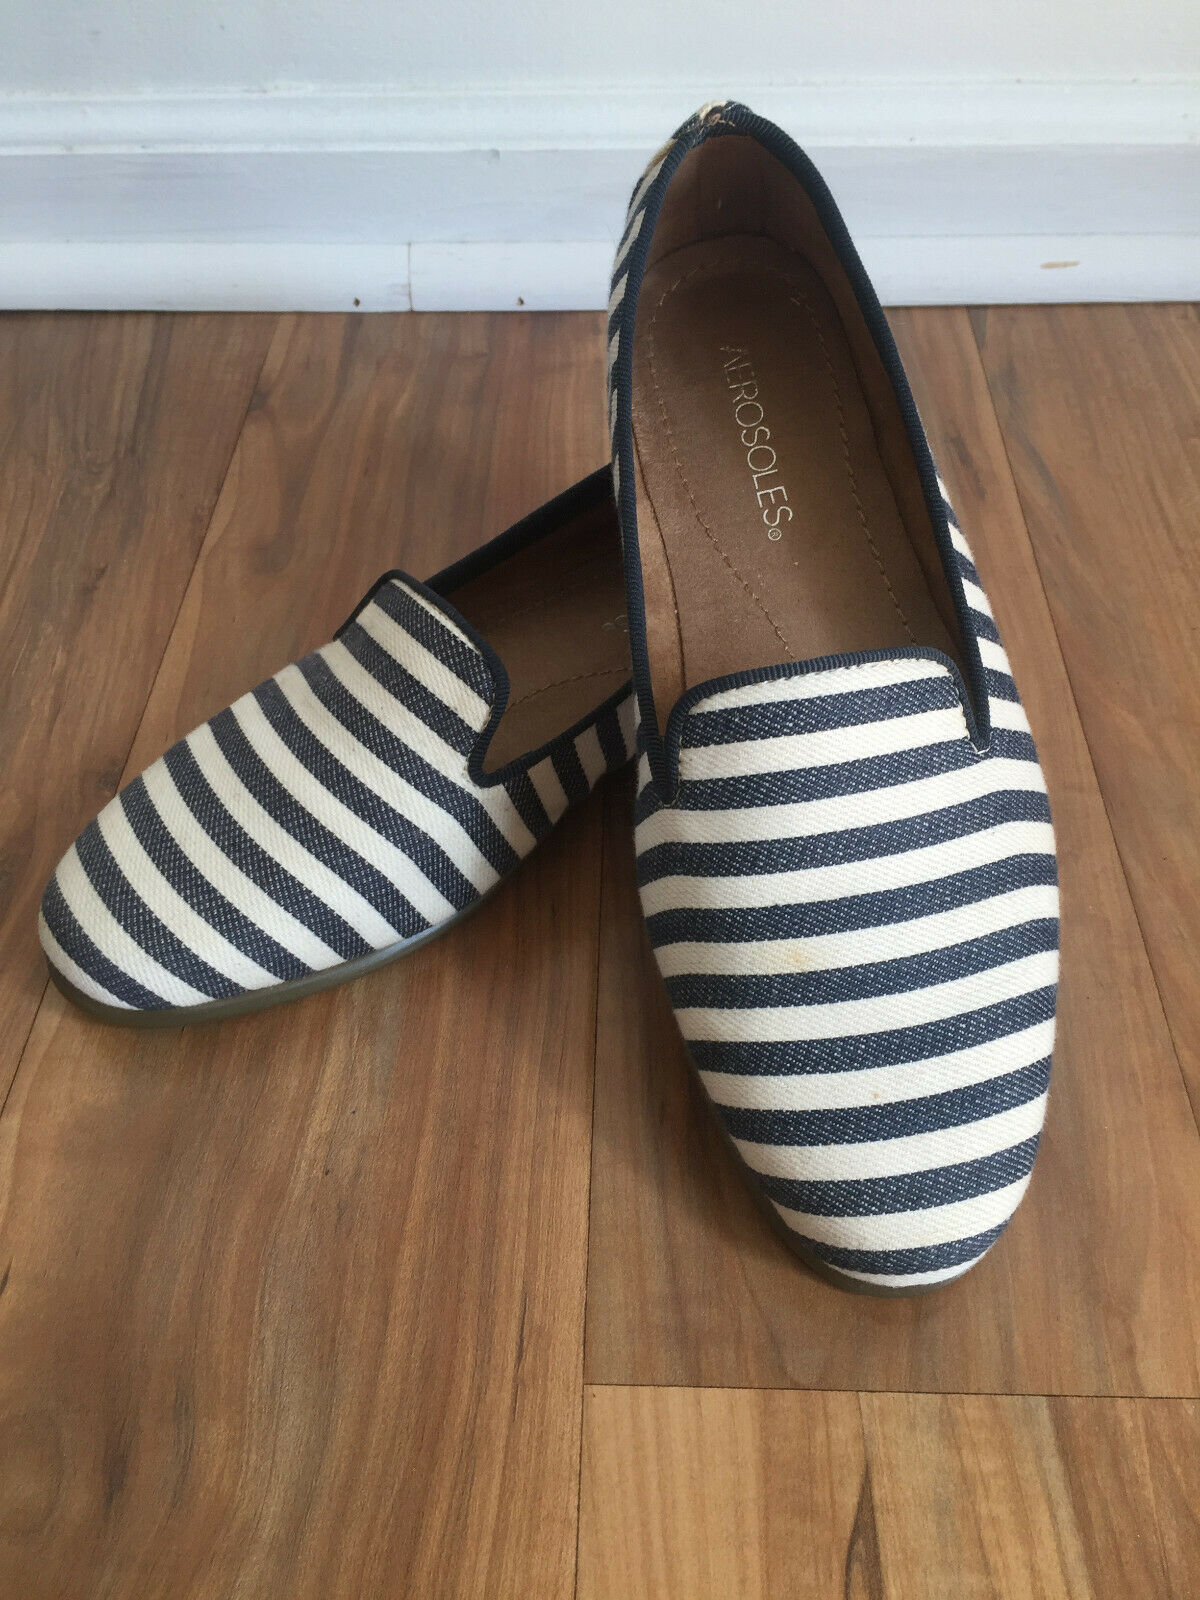 AEROSOLES SZ 7.5 LOAFER FLATS SHOES WOMEN NAVY AND IVORY STRIPE